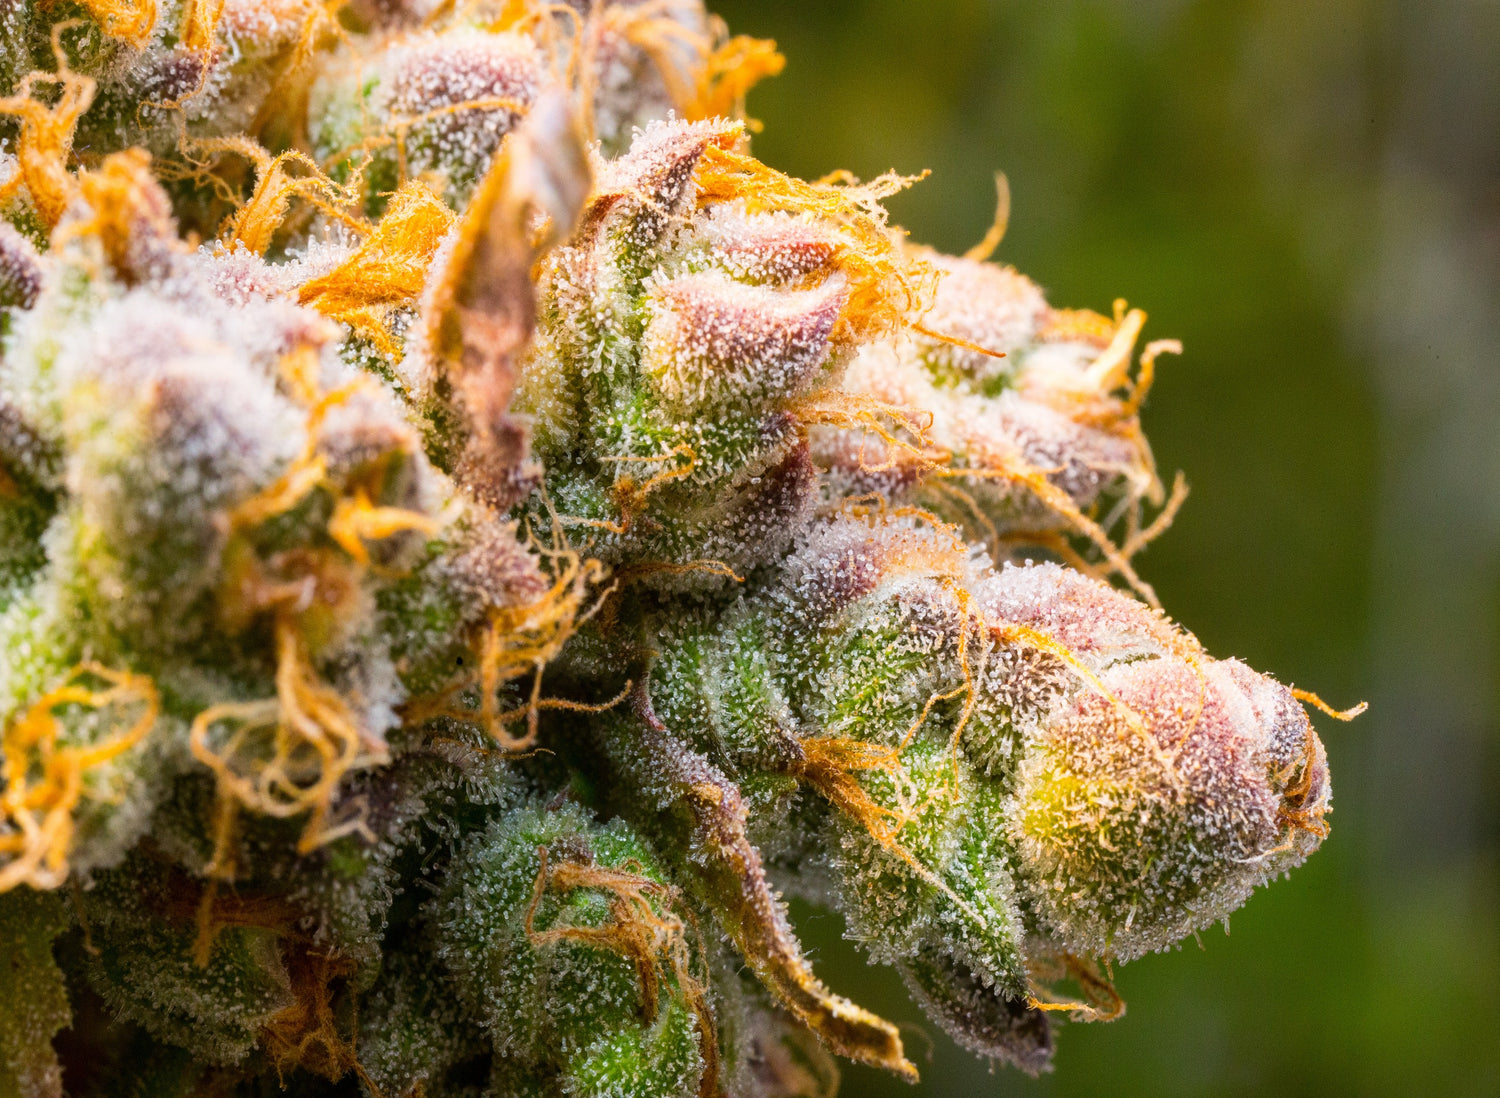 Best Microscope For Viewing Trichomes: Top 3 